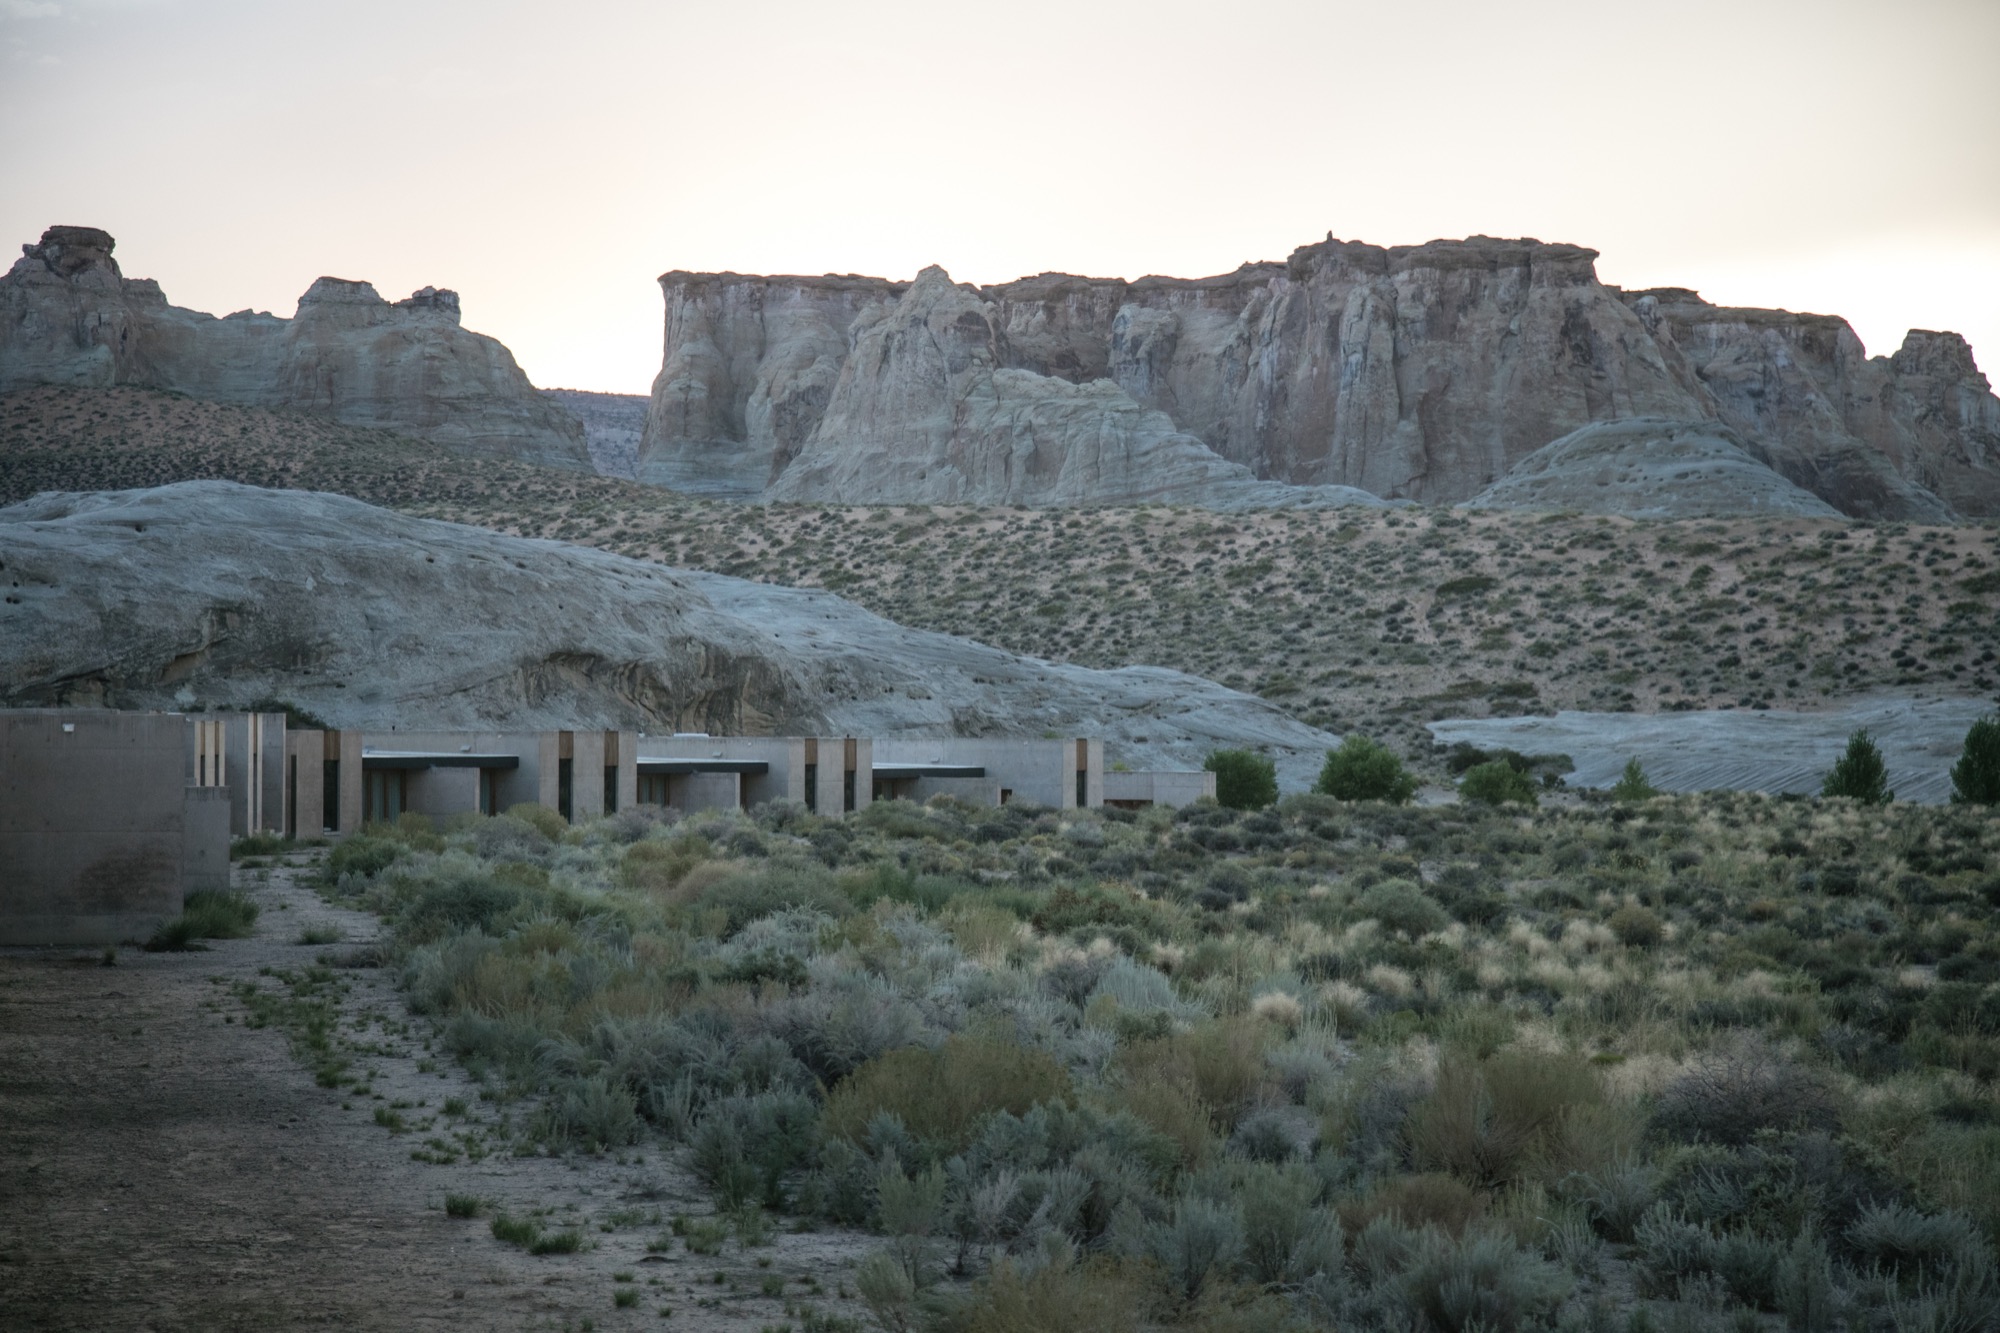 The Amangiri sits on 600 mostly wild acres / Photo by Jake Weisz